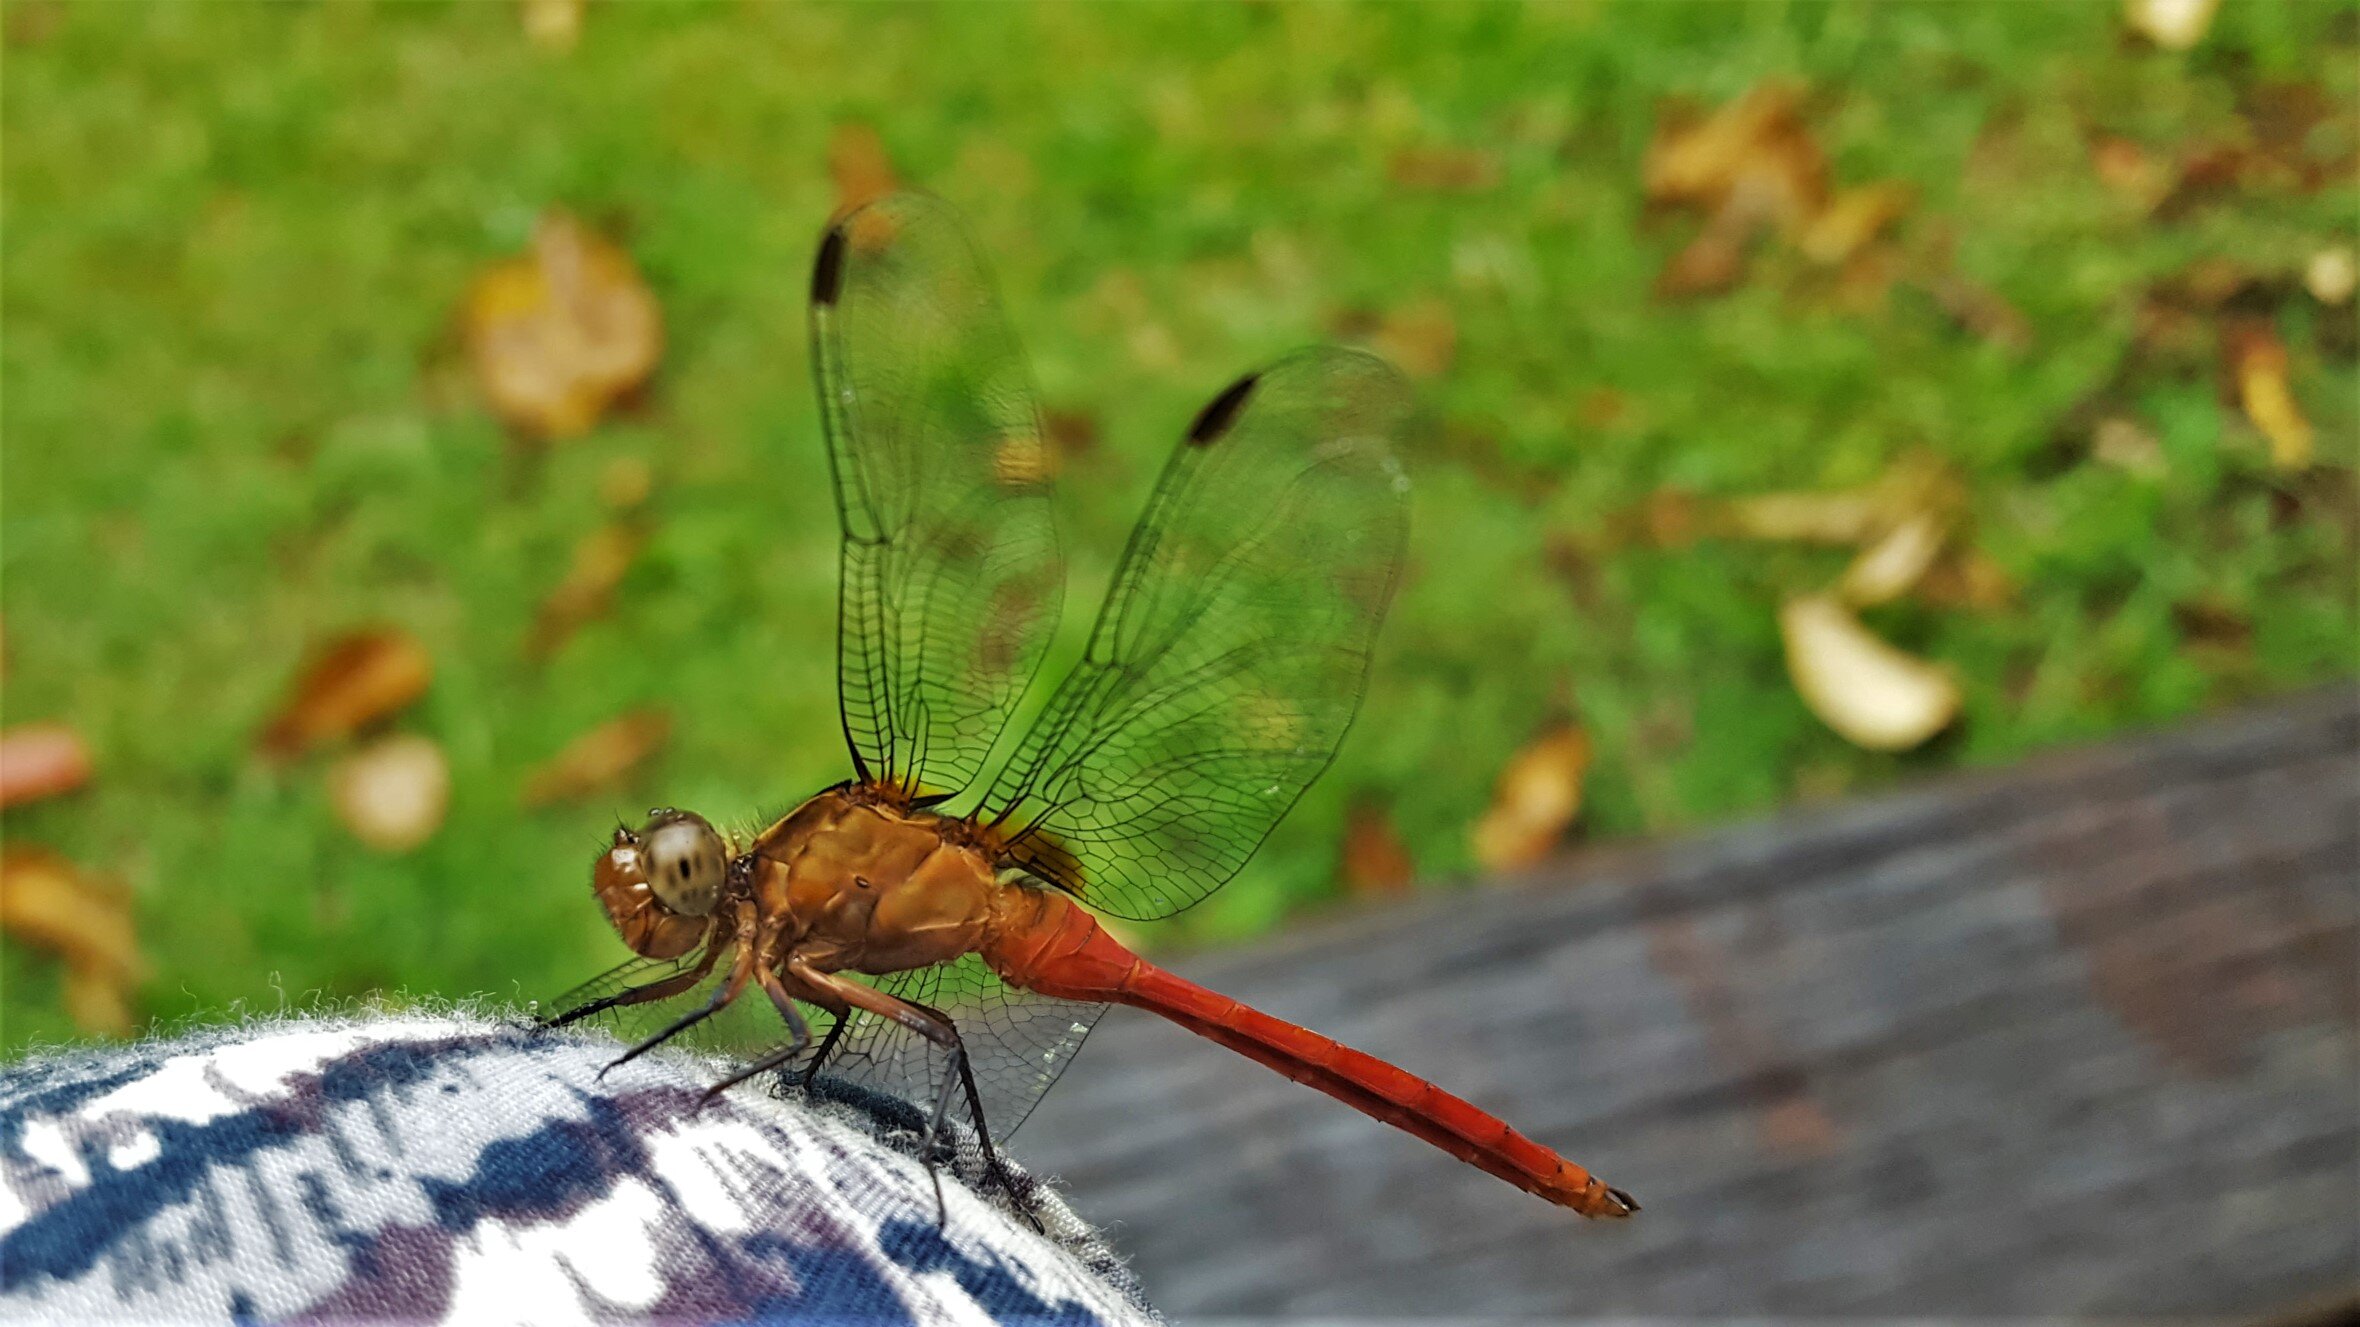 RED RESTING DRAGONFLY